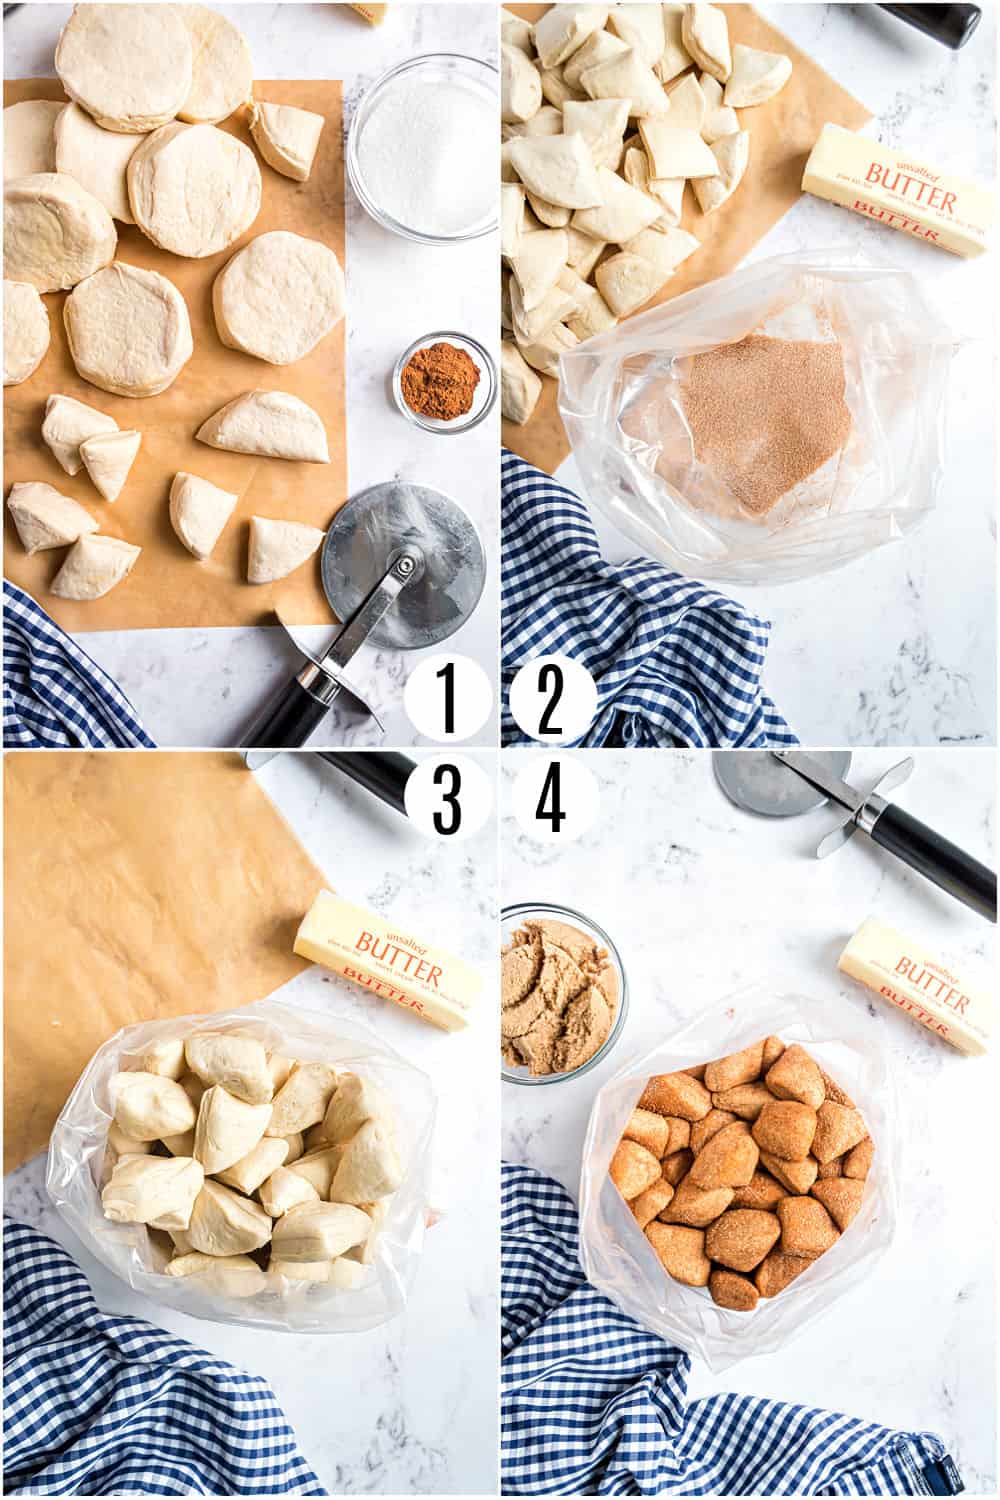 Step by step photos showing how to prepare biscuits for monkey bread.